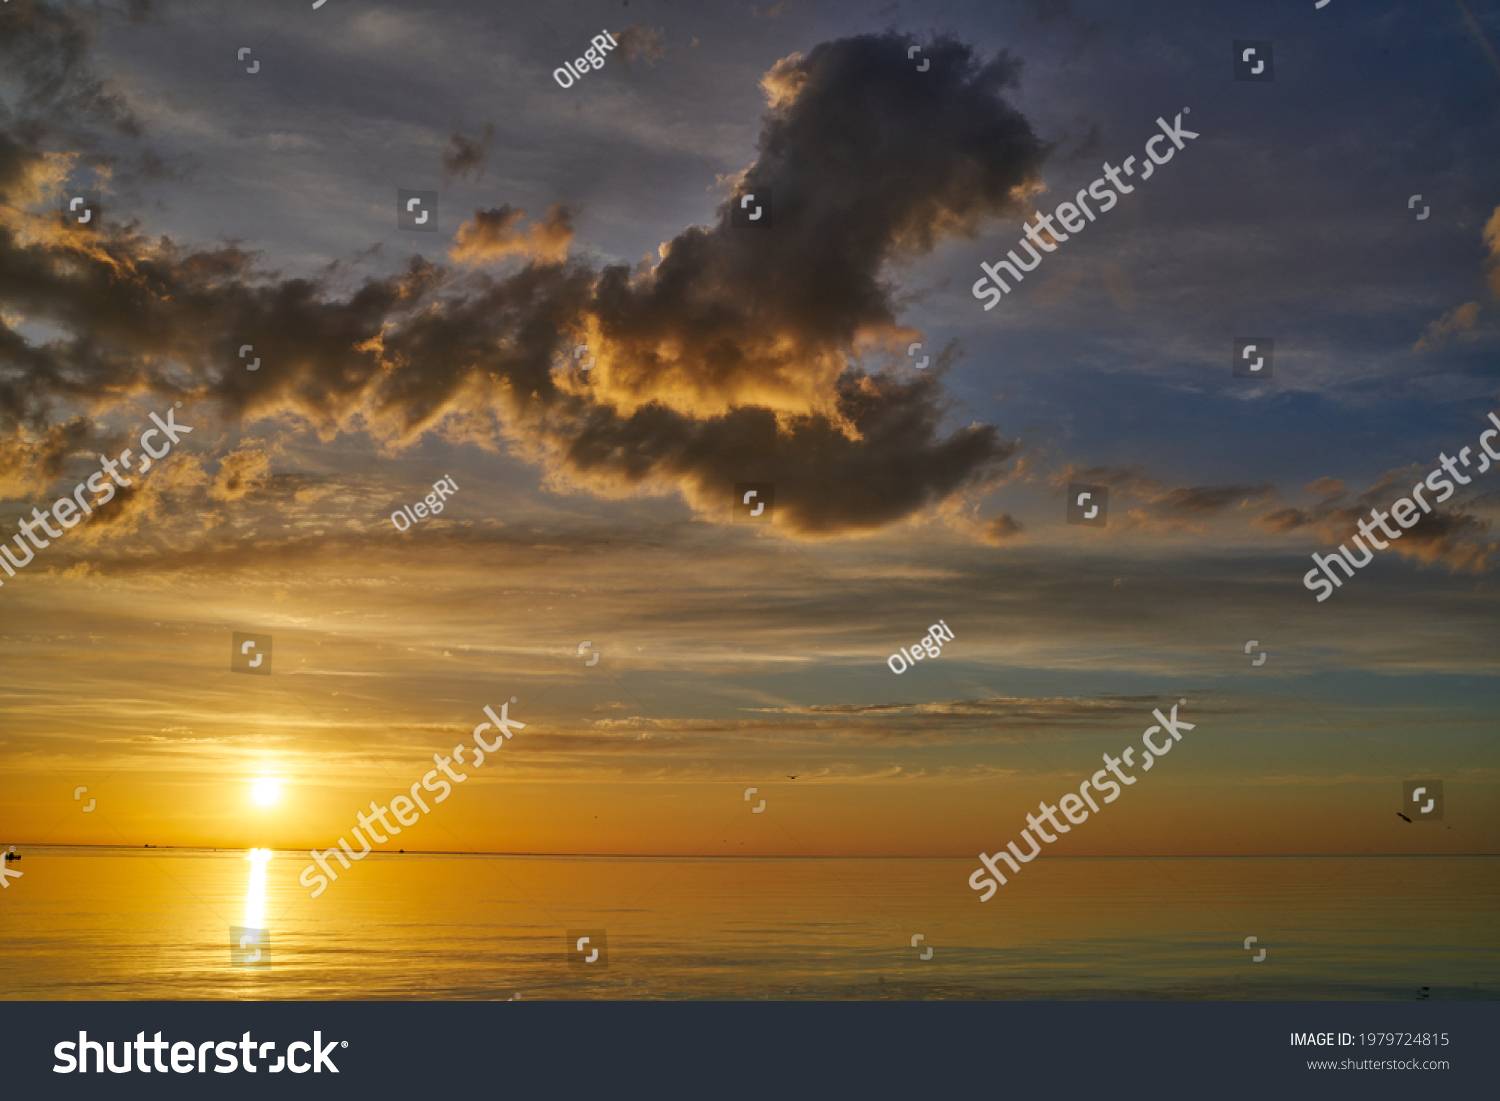 Evening sky with dramatic clouds over the sea. Dramatic sunset over the sea. #1979724815